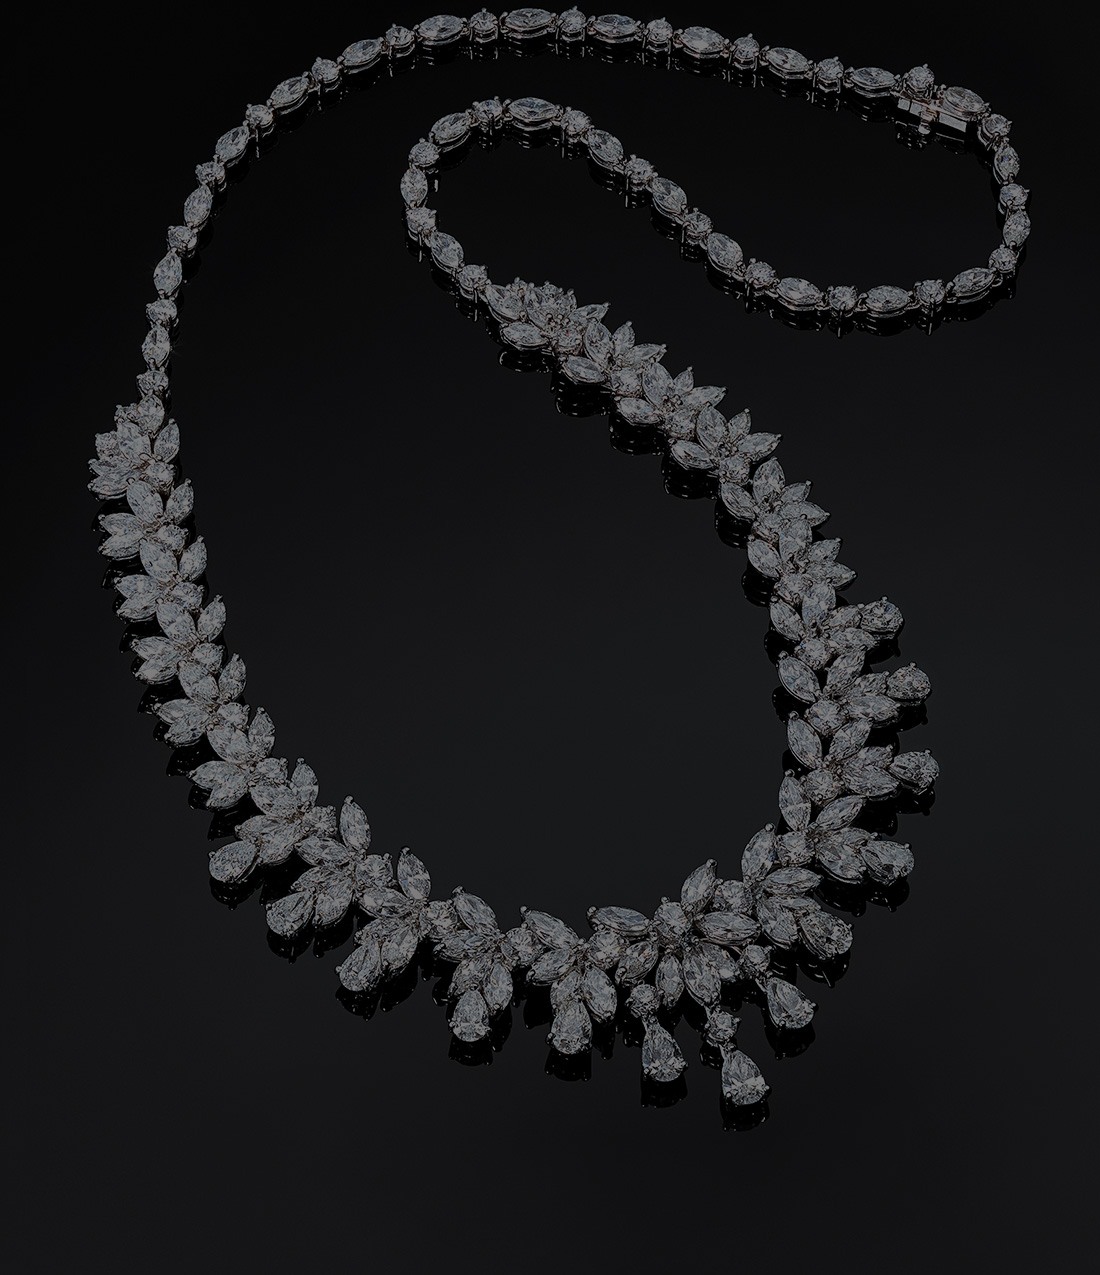 Fancy-shaped Diamond necklace on a glossy black background, shown by Gemcamp